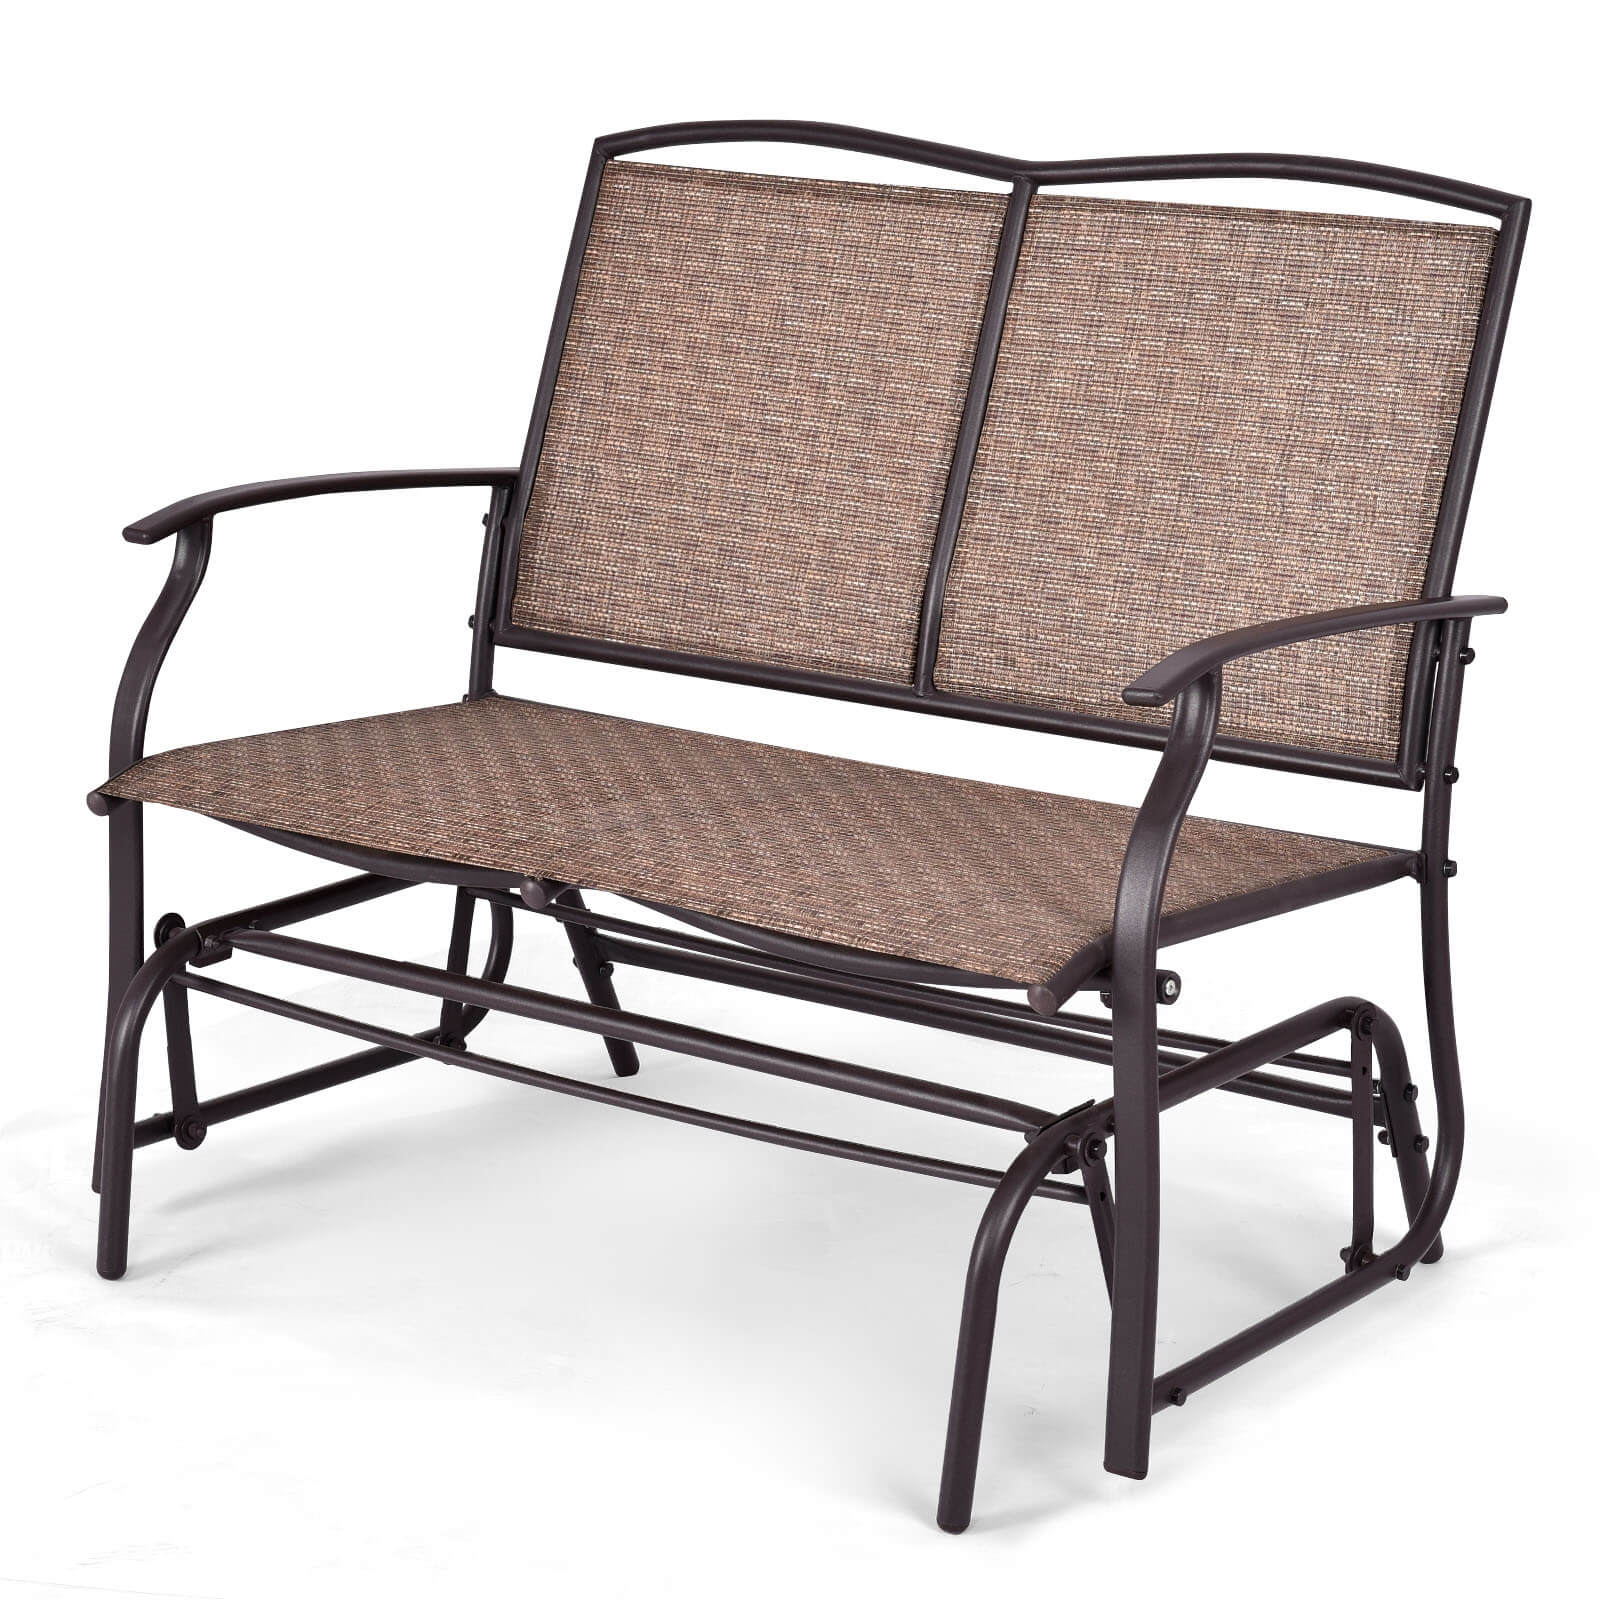 2-Person Patio Swing Glider Bench with Heavy-Duty Steel Frame-Coffee